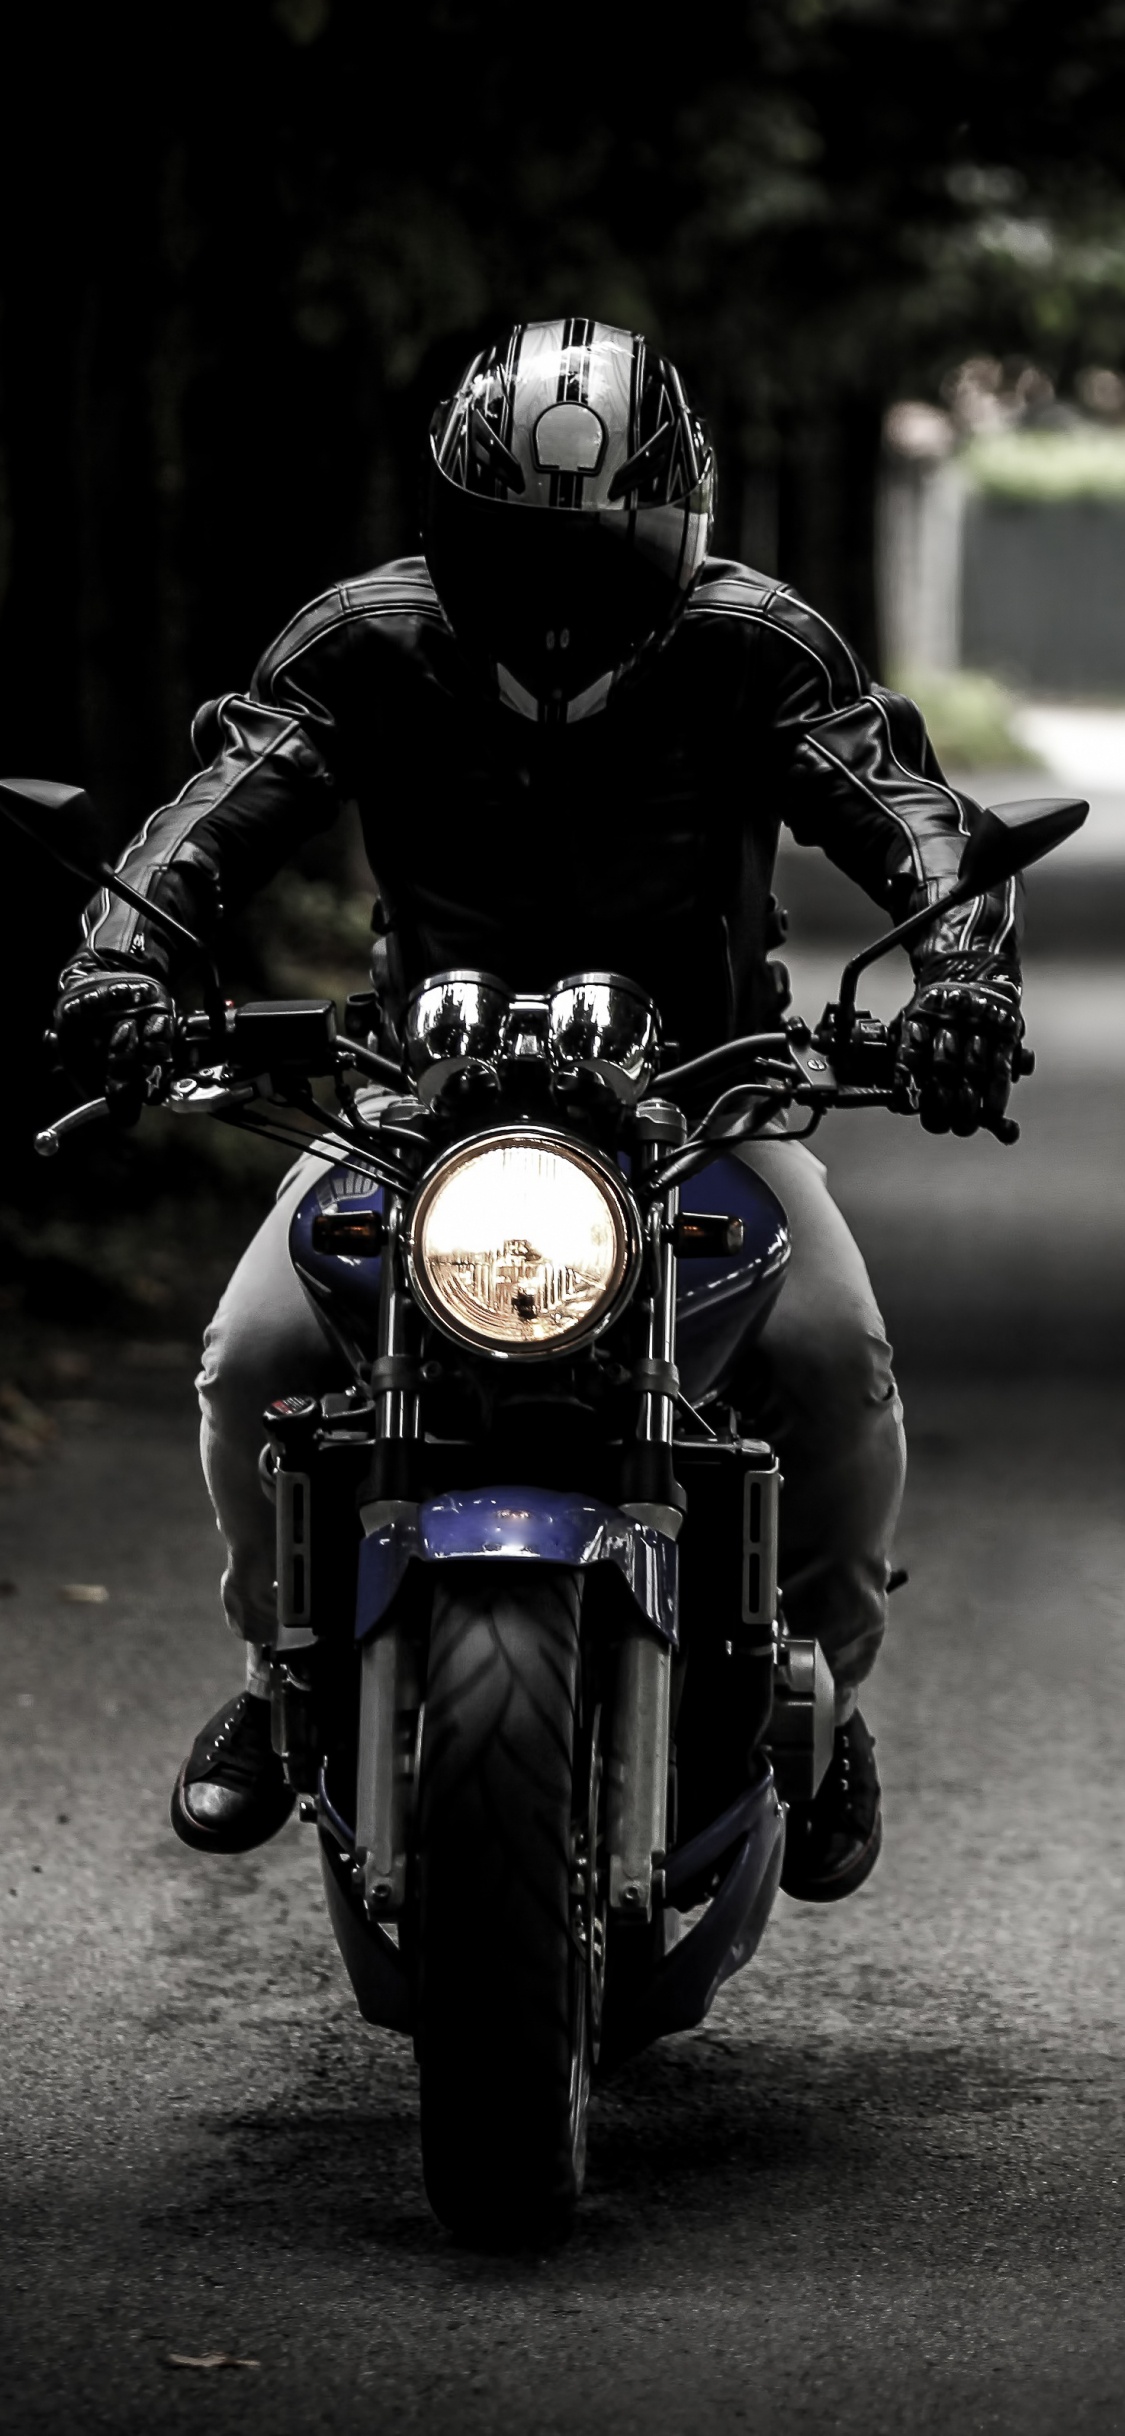 Man in Black Helmet Riding Motorcycle on Road During Daytime. Wallpaper in 1125x2436 Resolution